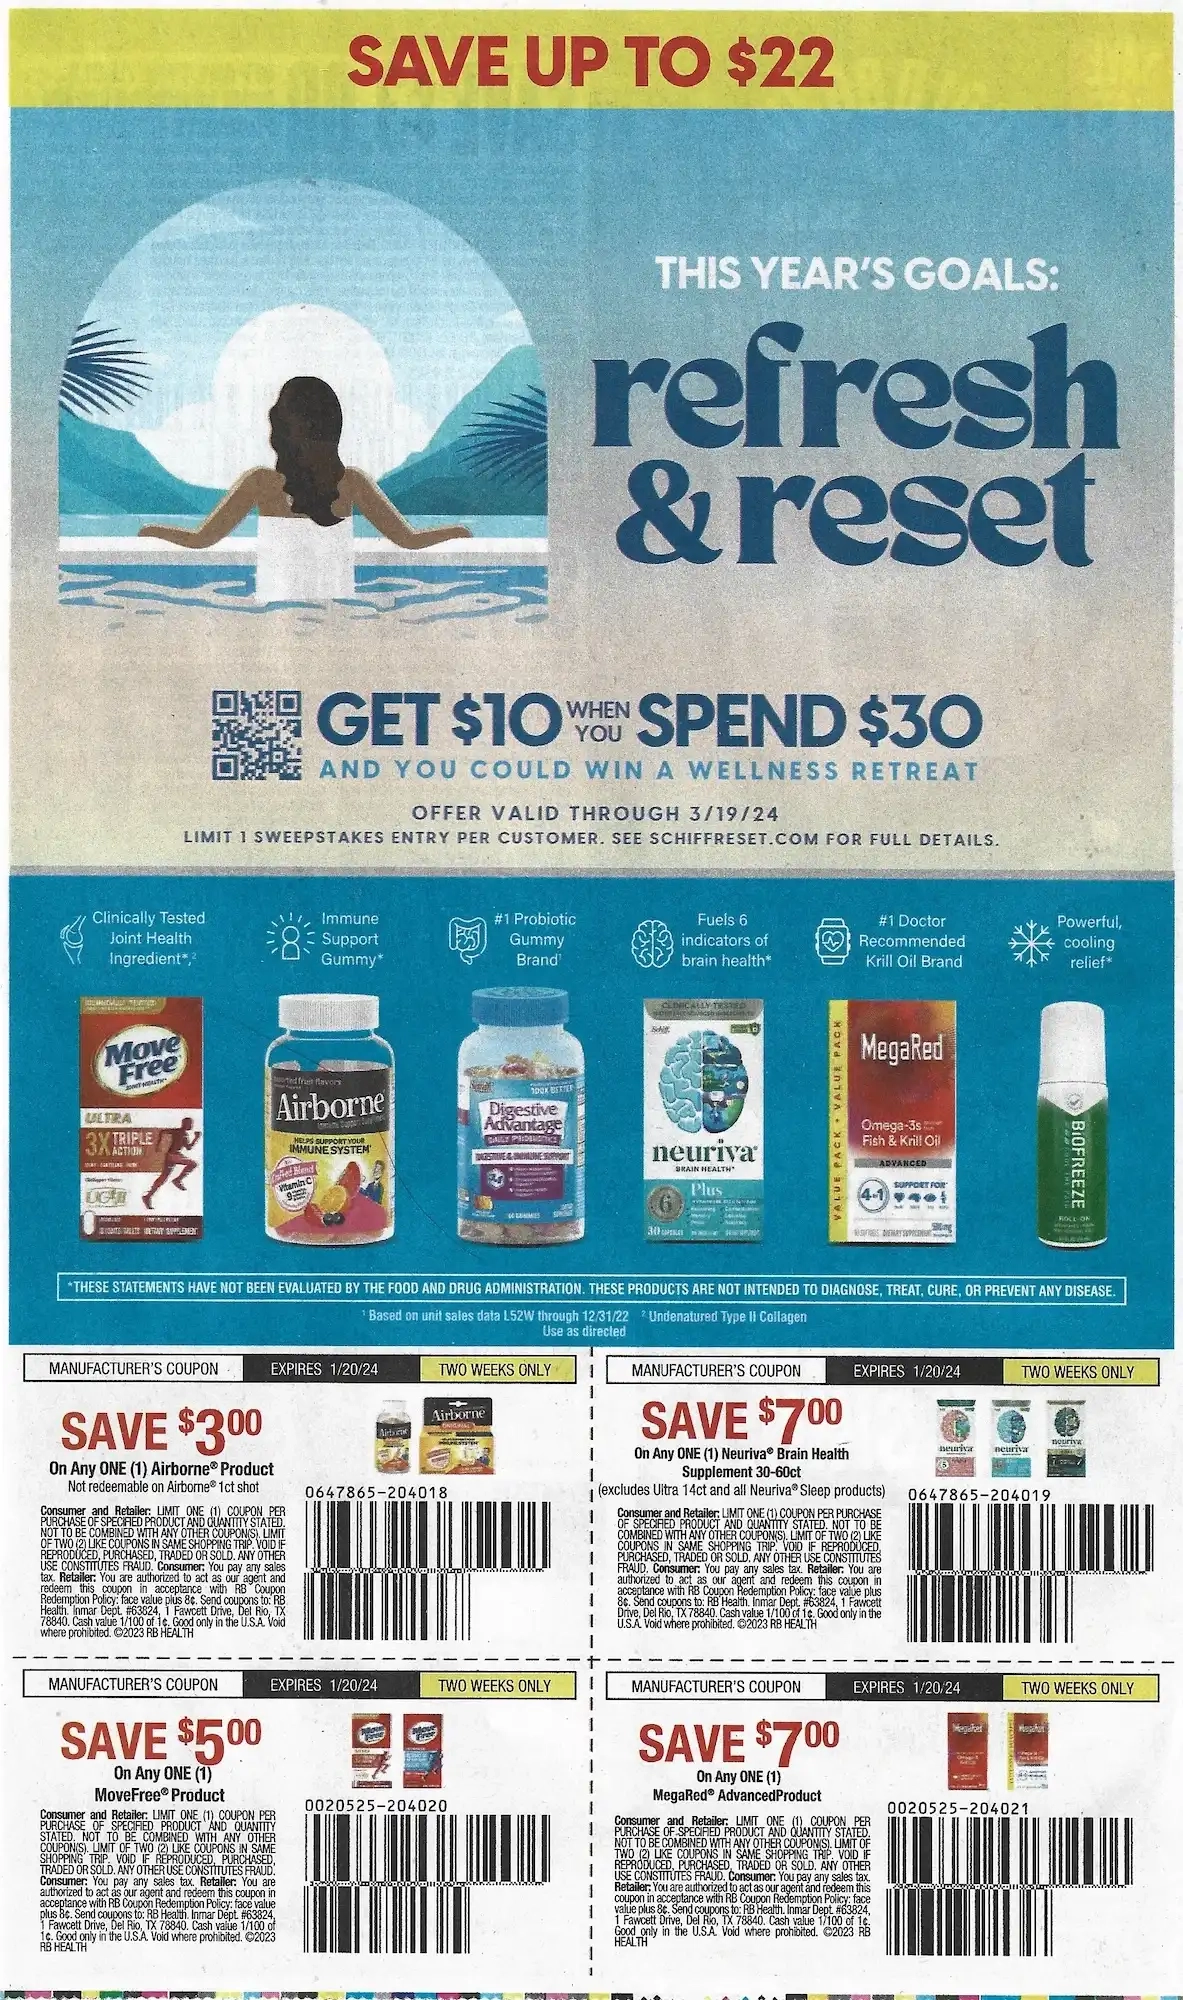 SmartSource Weekly Mailer Coupons - 01/07/2024 Move Free Airborne Neuriva Megared Biofreeze